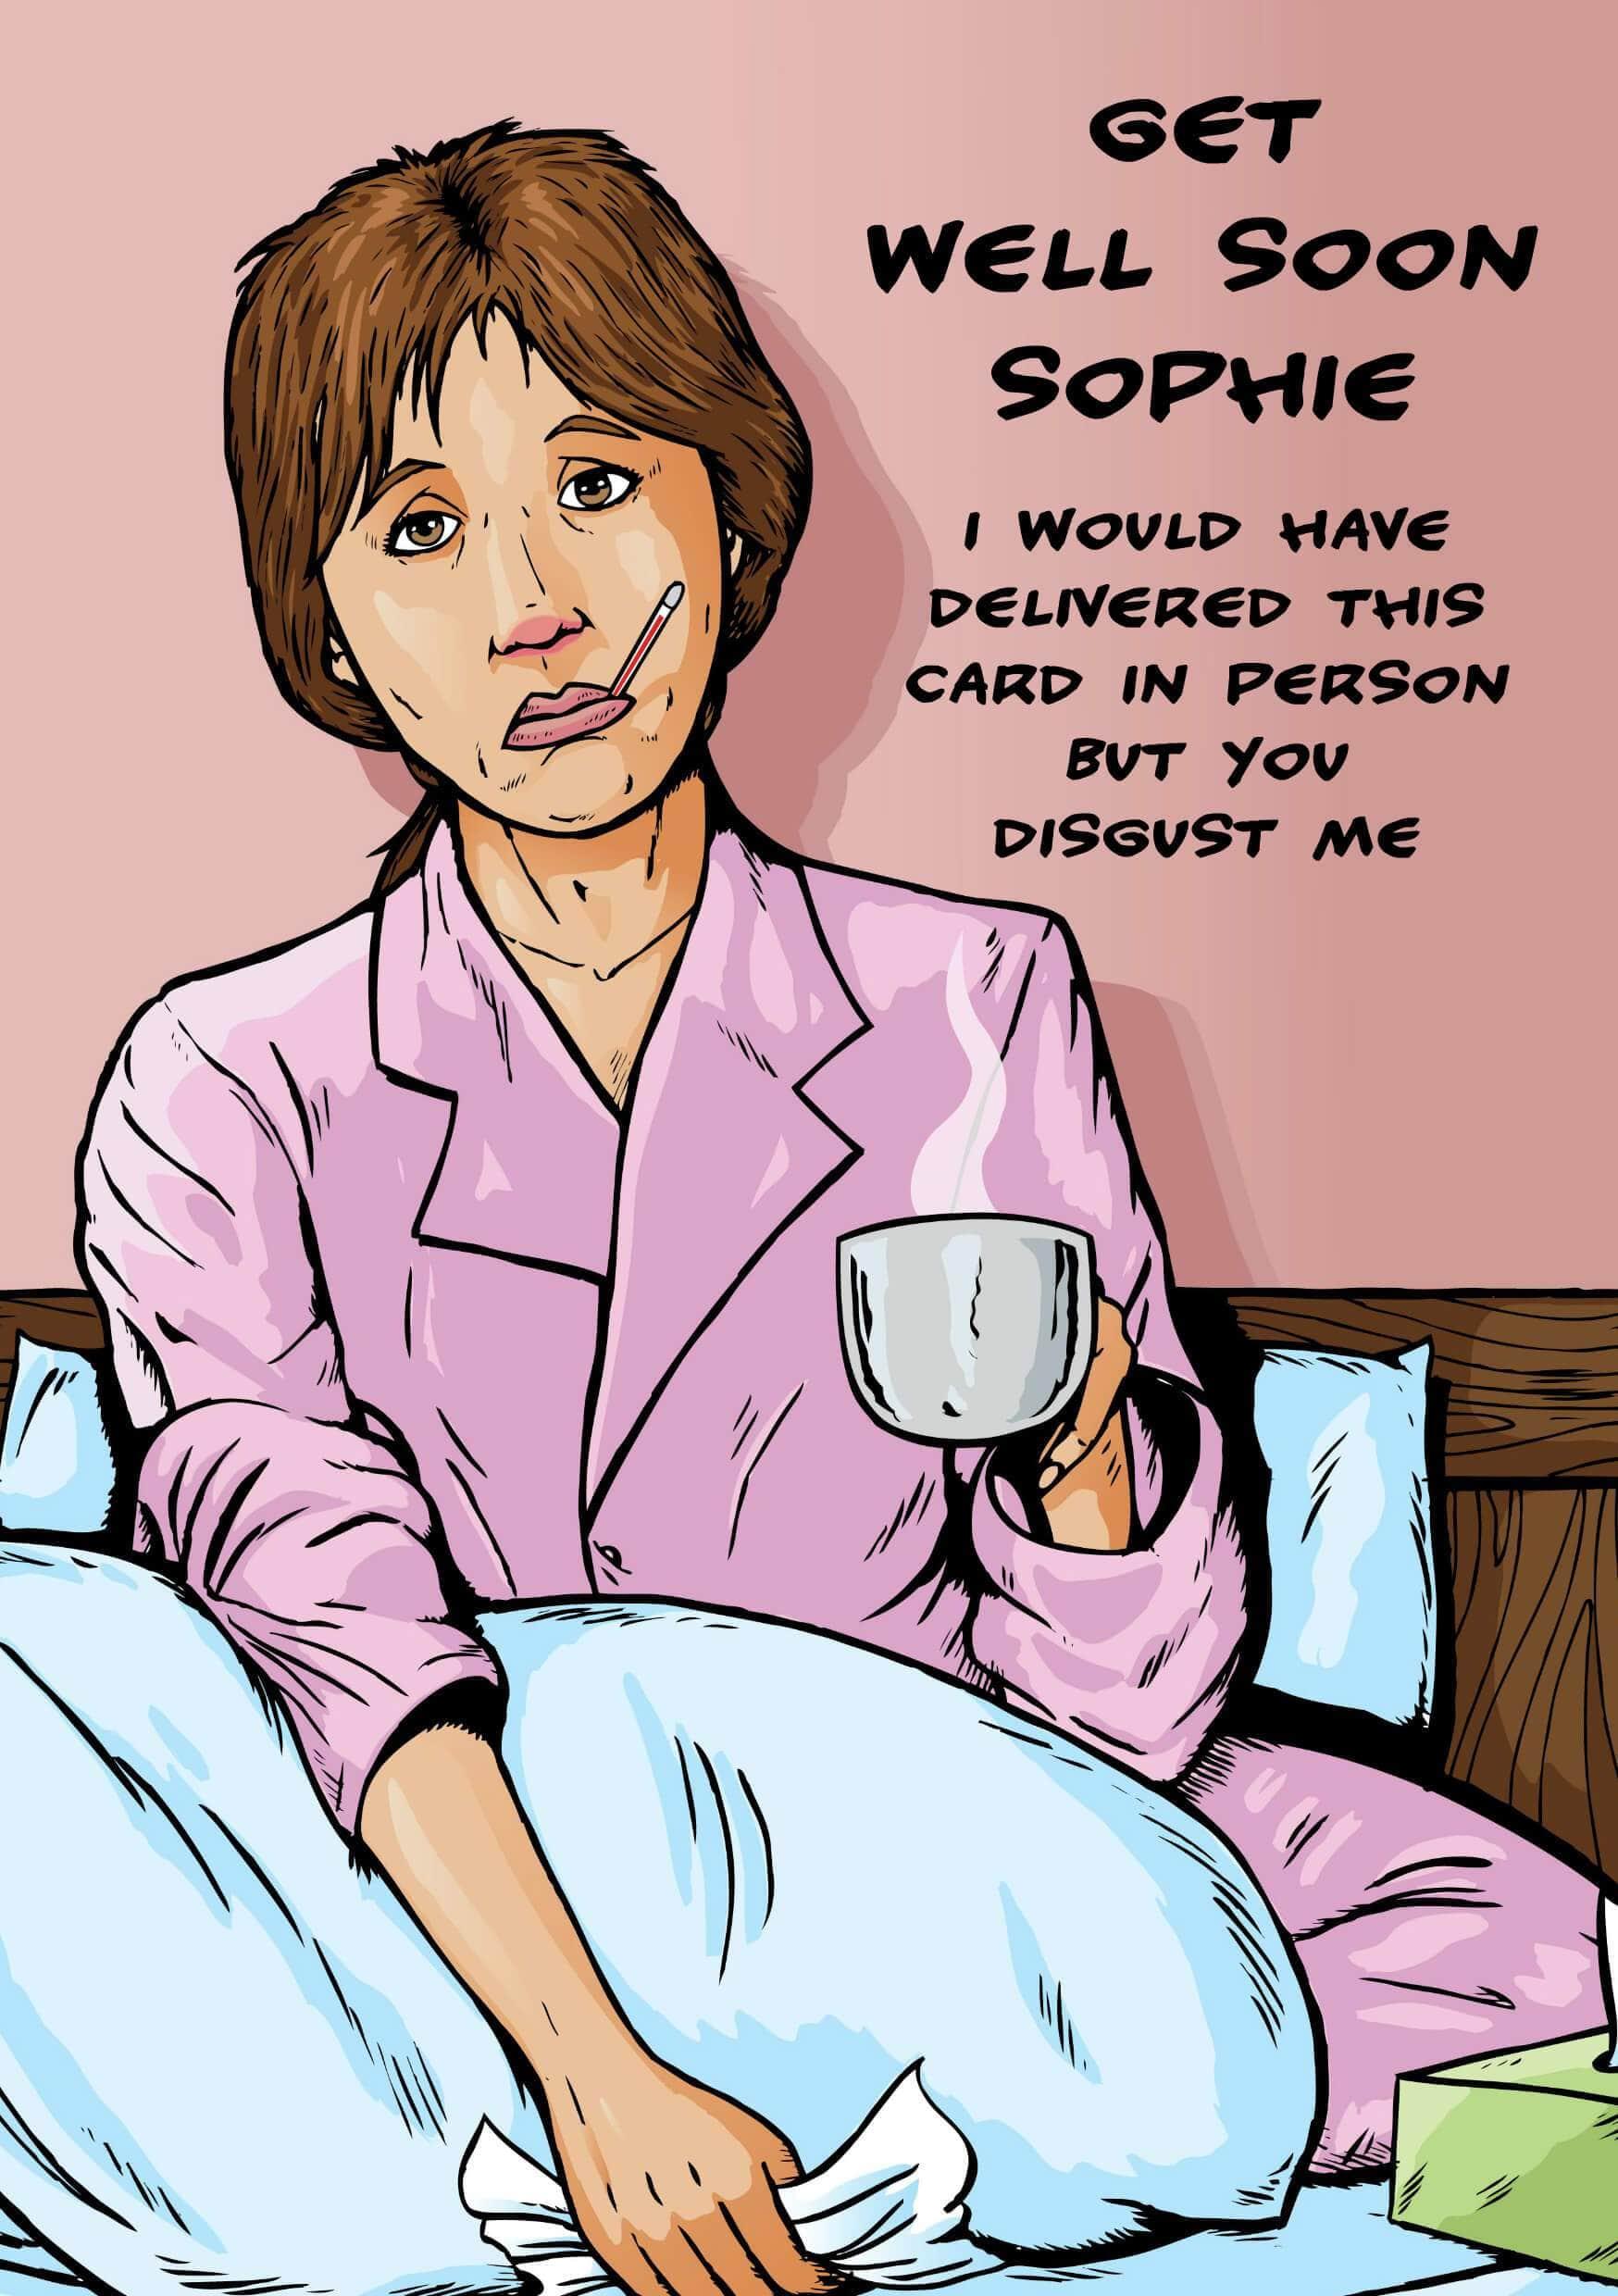 Send a Disgust Me Sophie greeting card from Twisted Gifts to wish Sophie a speedy recovery.